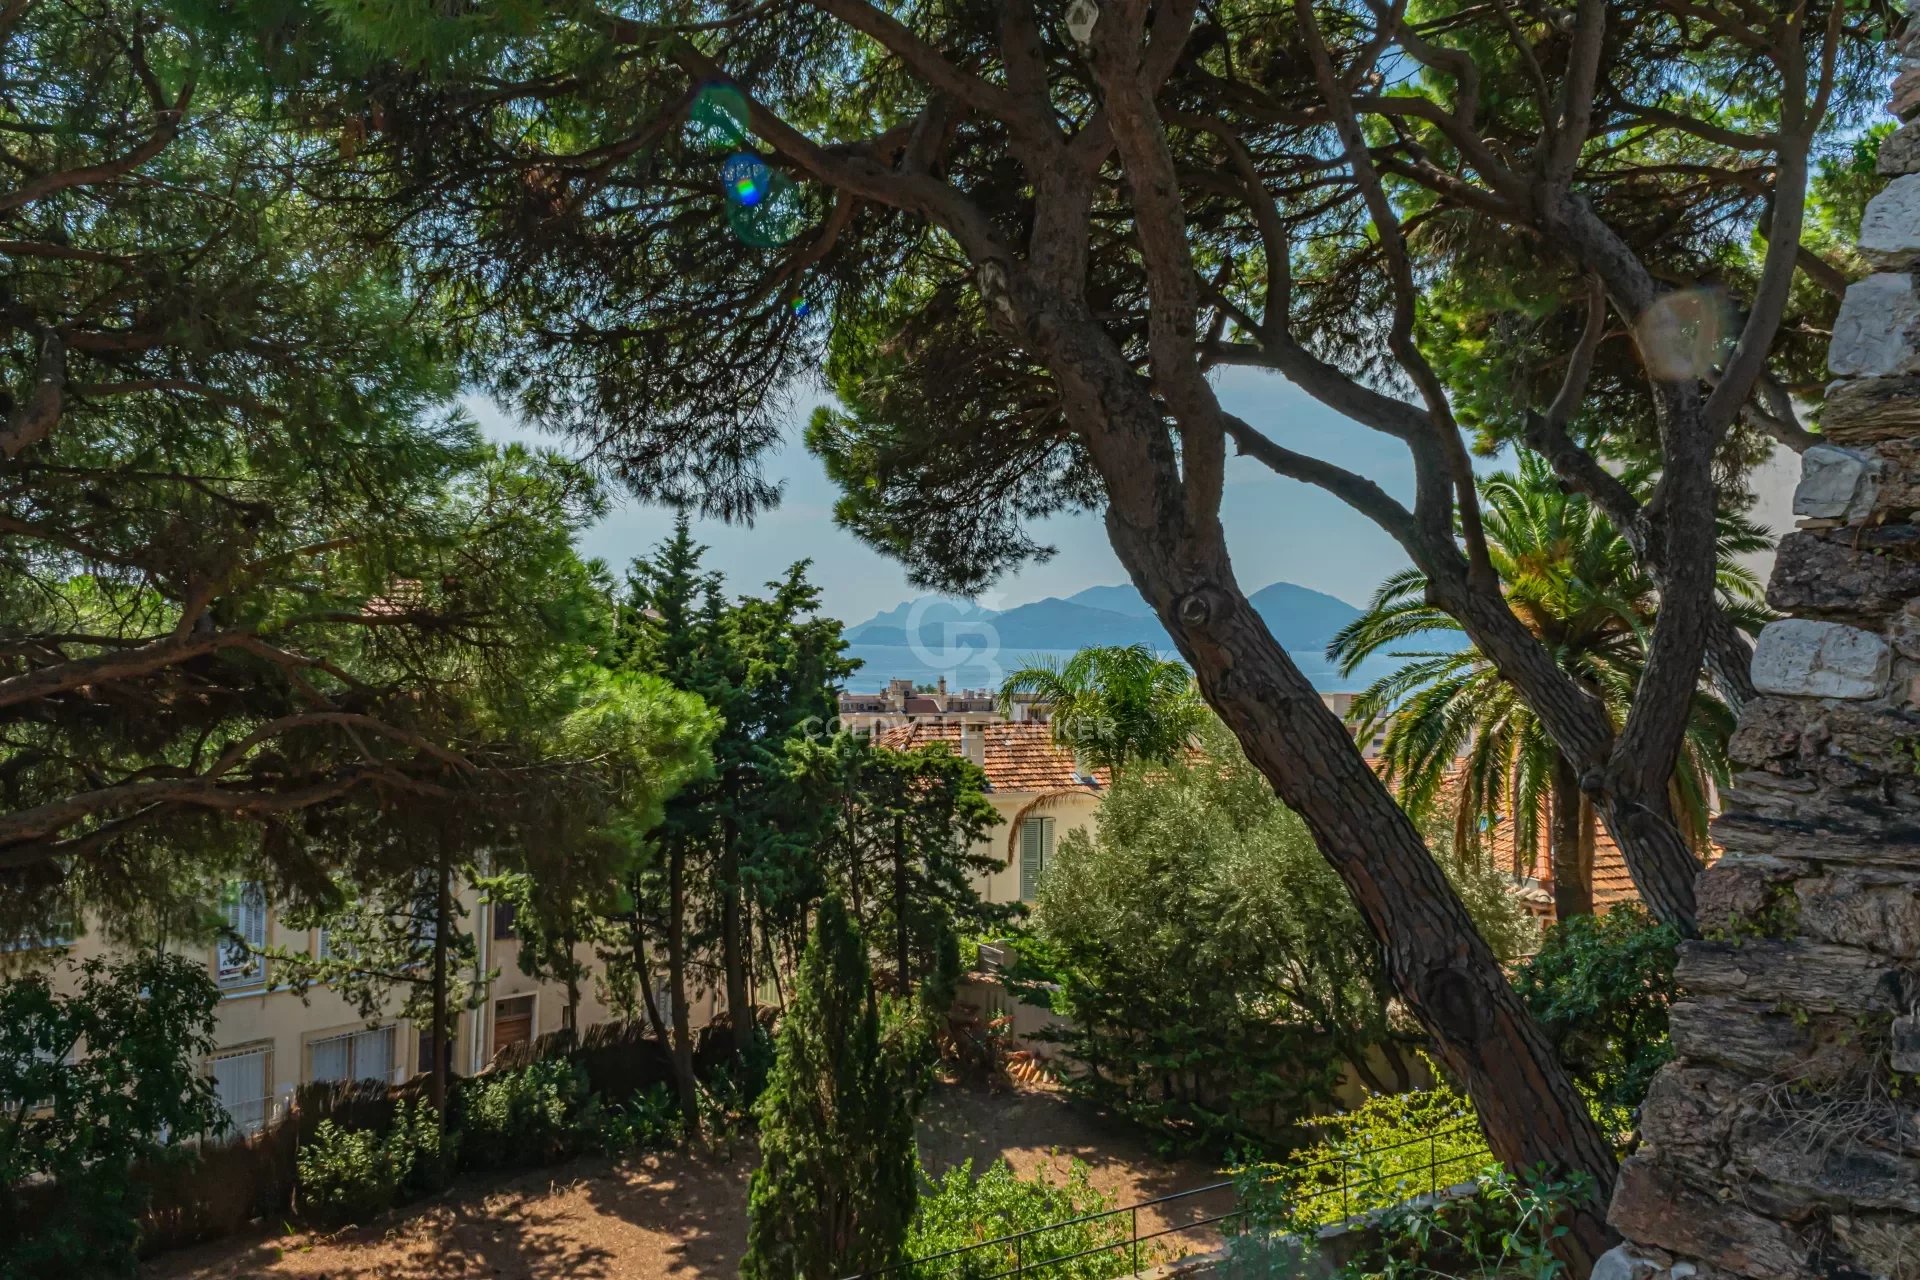 Authentic castle located in Cannes and enjoying a panoramic Seaview